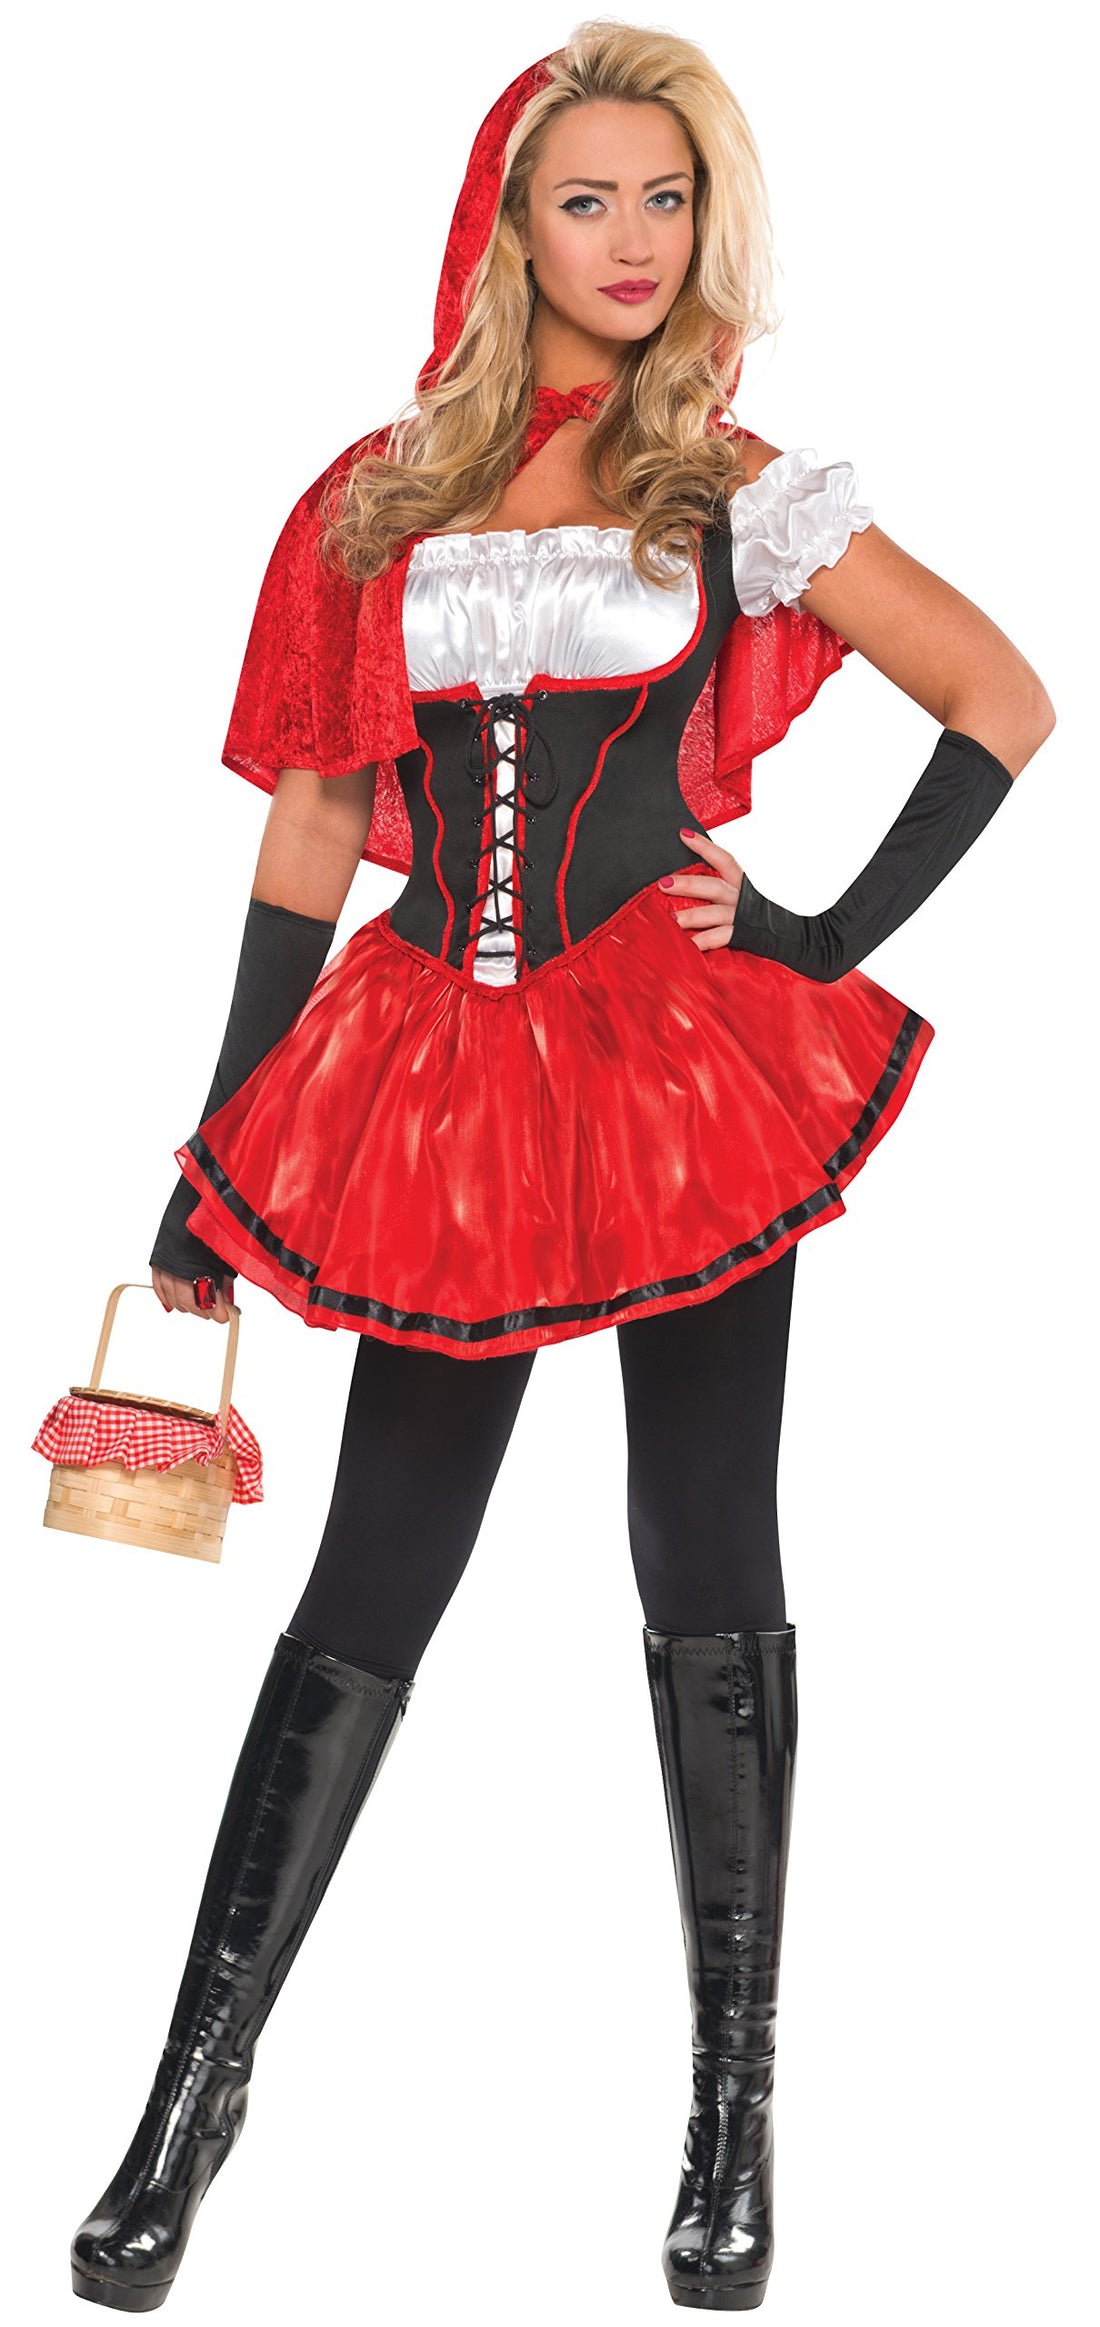 amscan 996967 Adult Costume Set with Red Riding Hood Theme, Size 10-12, Multicolour